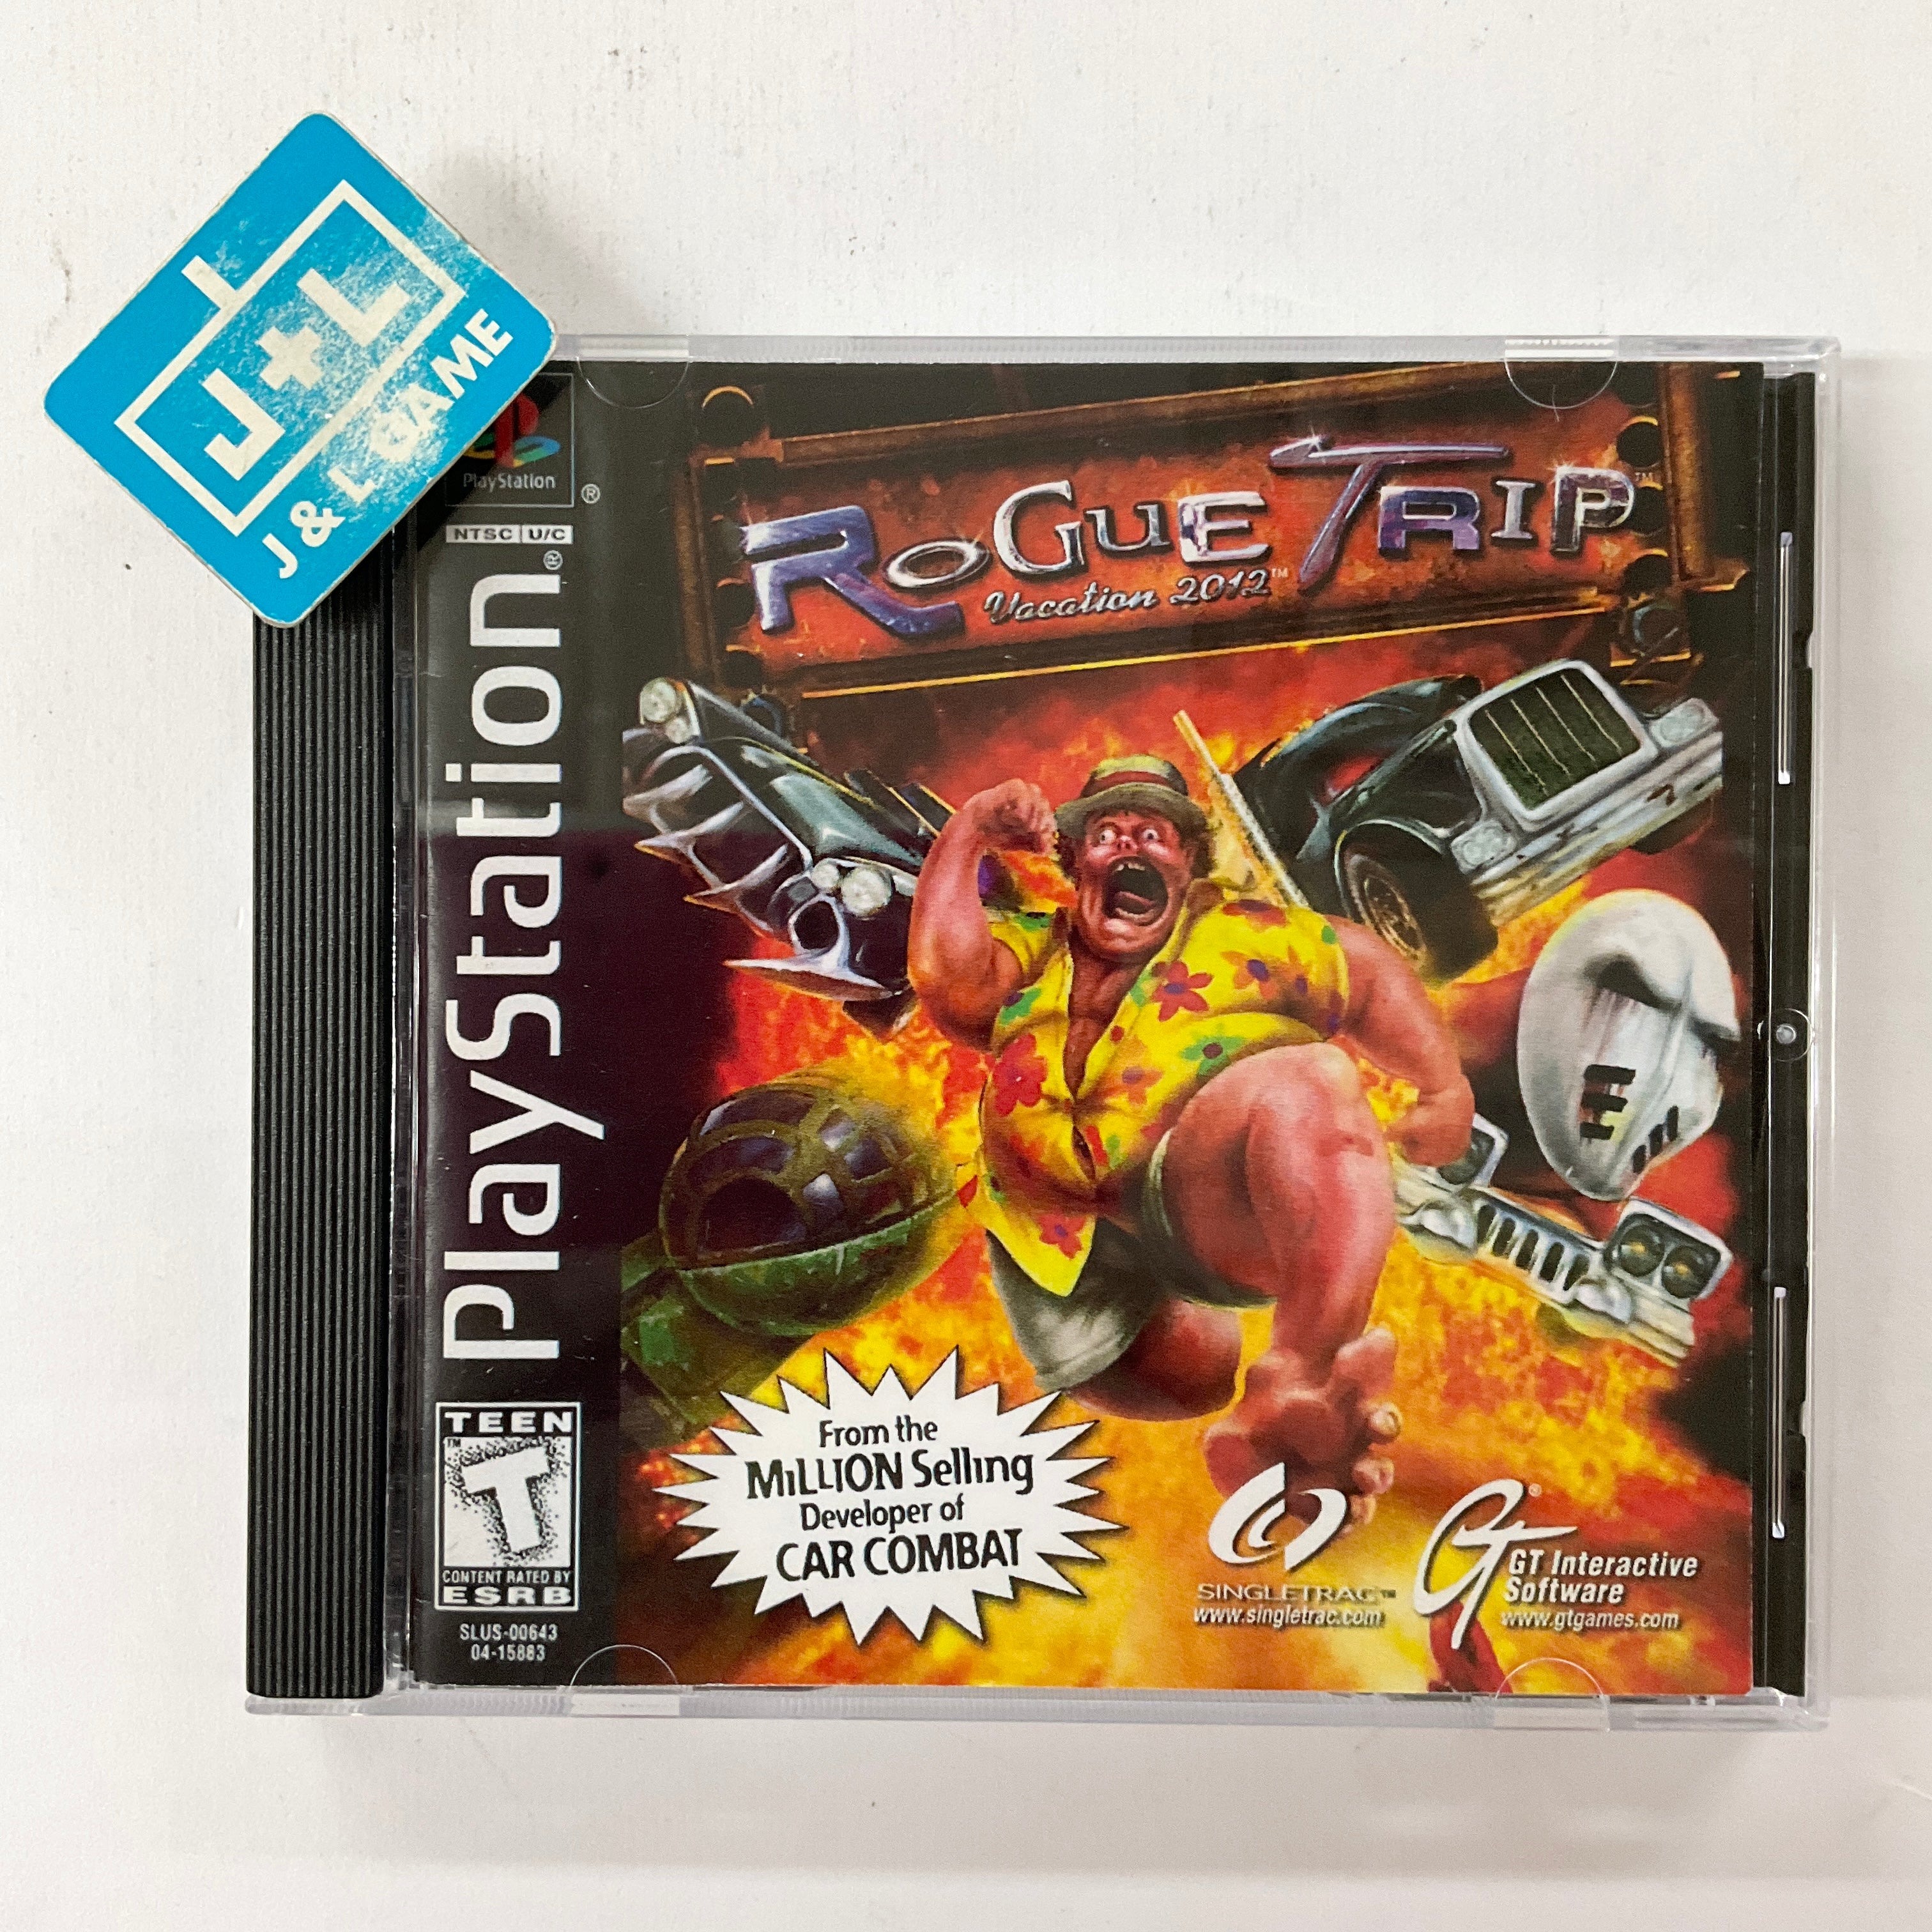 Rogue Trip: Vacation 2012 - (PS1) PlayStation 1 [Pre-Owned] Video Games GT Interactive   